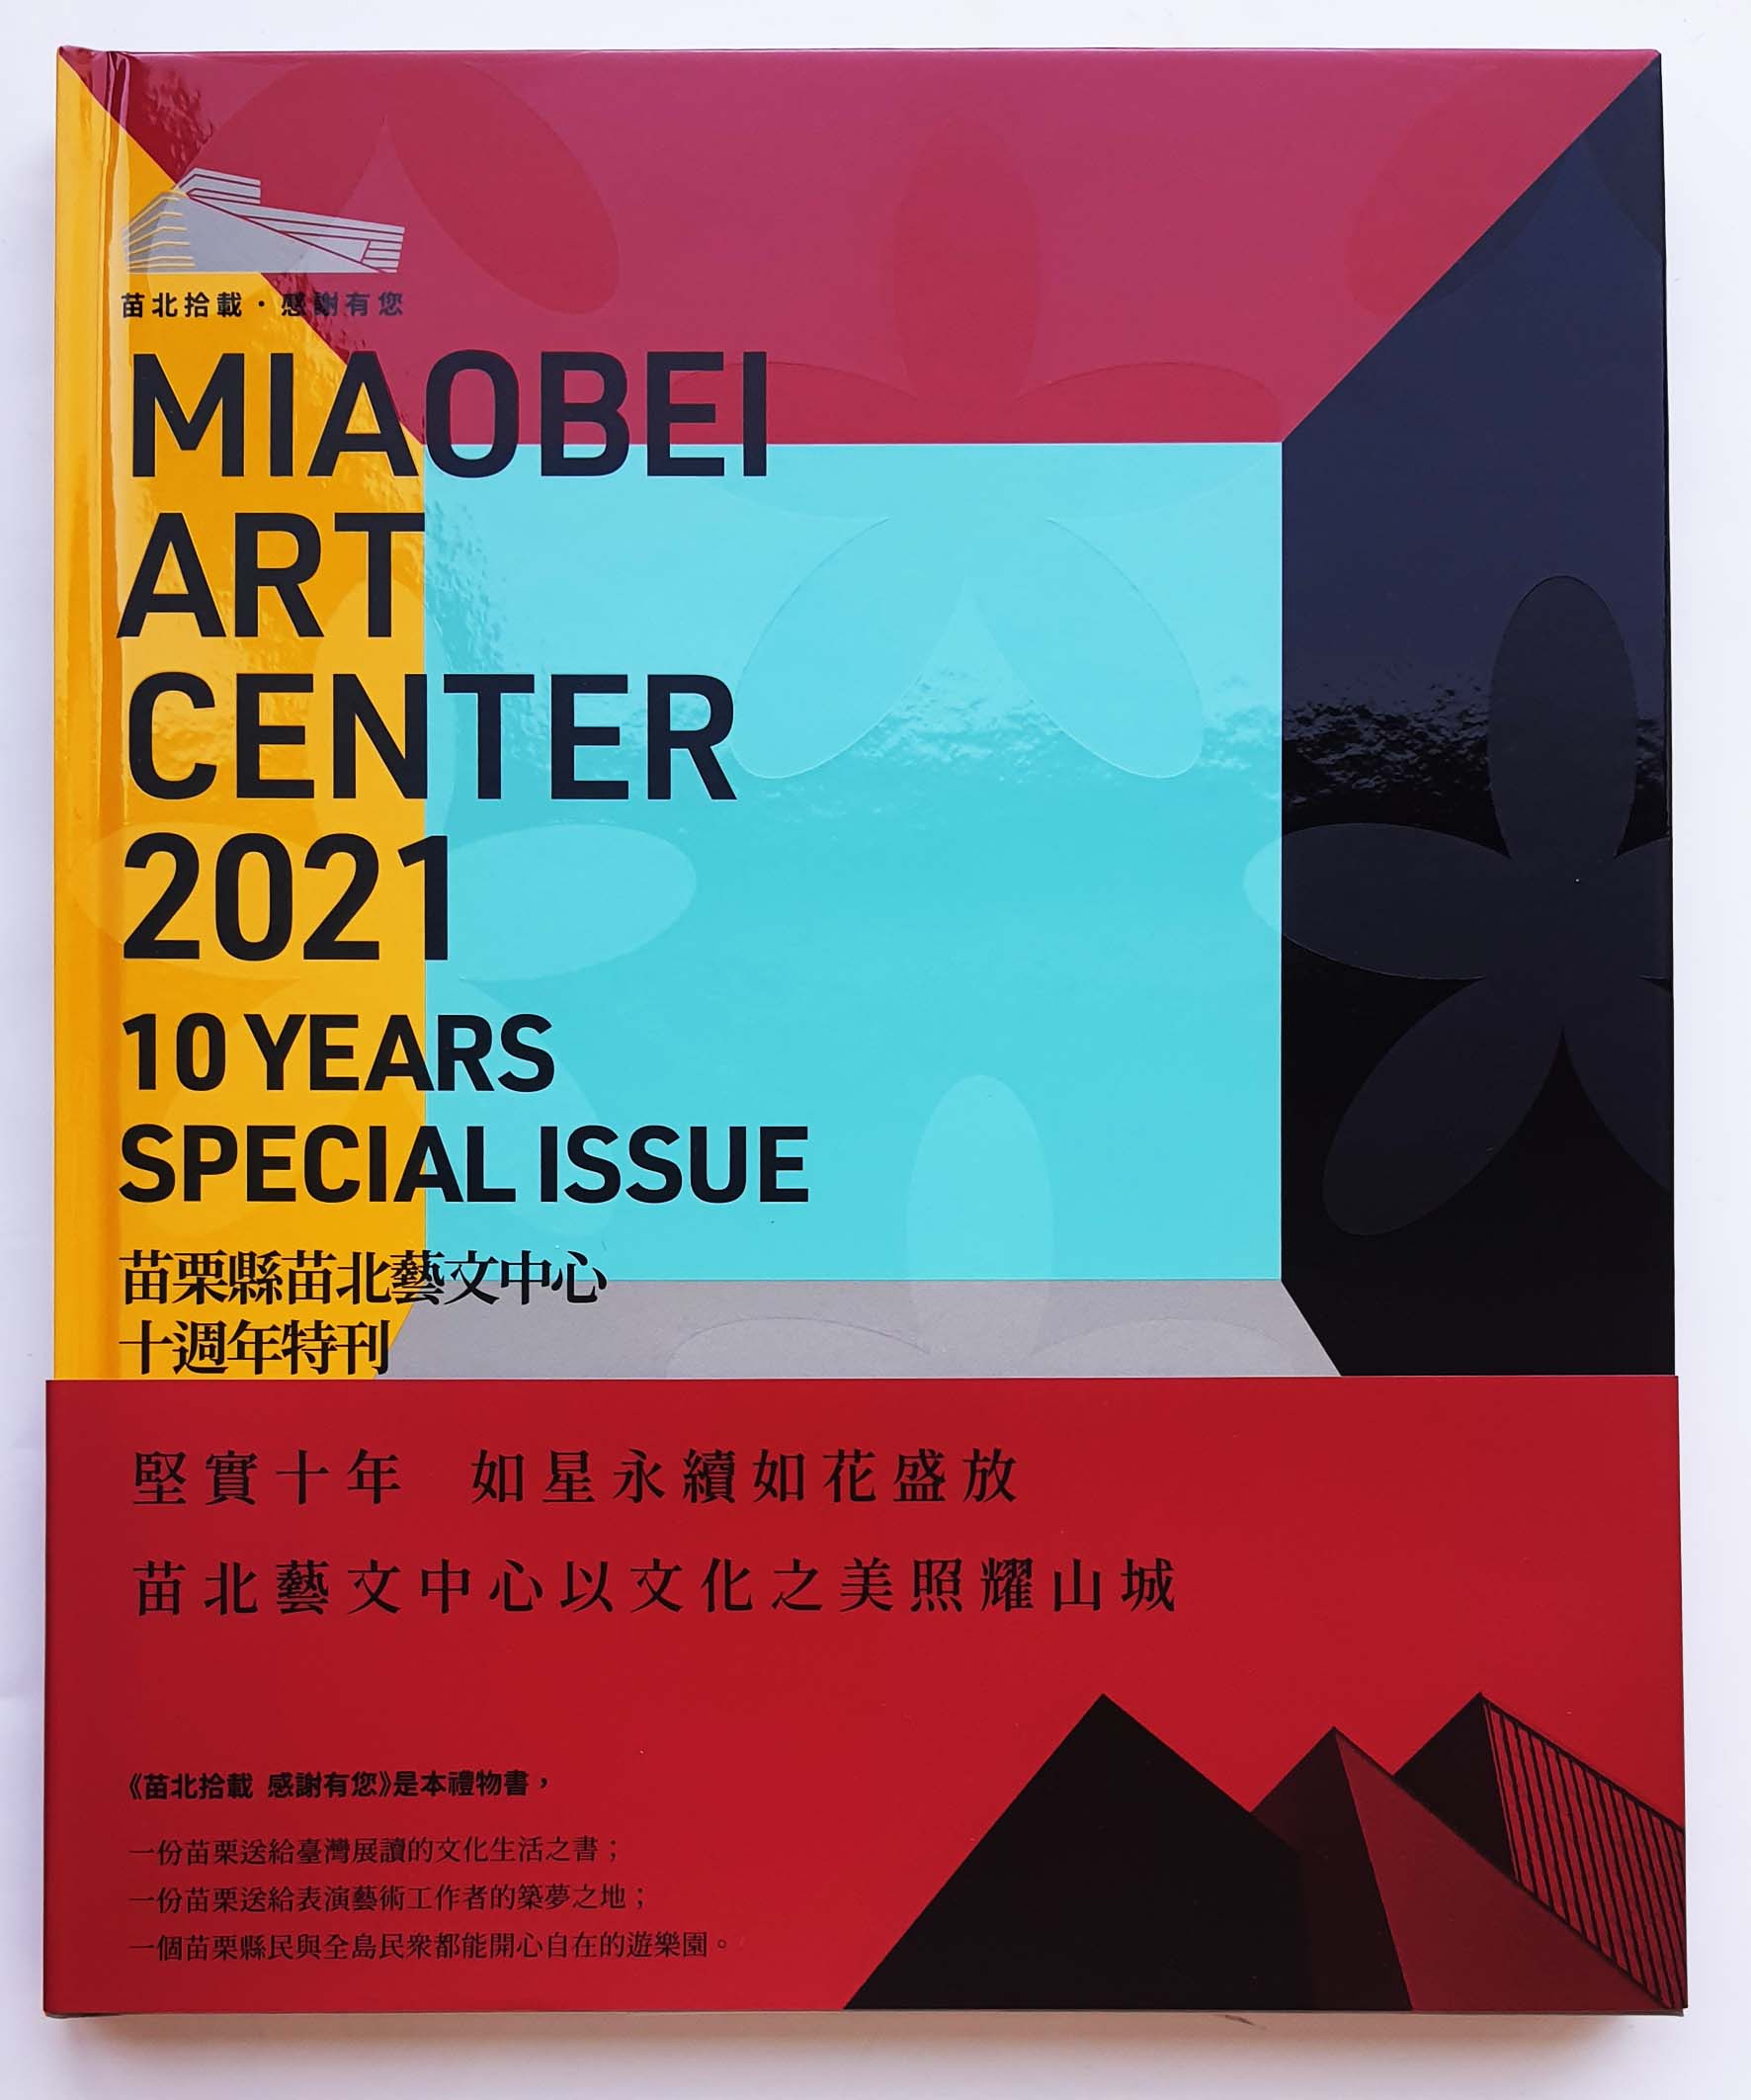 MIAOBEI ART CENTER 2021 苗栗縣苗北藝文中心 10 YEARS SPECIAL ISSUE